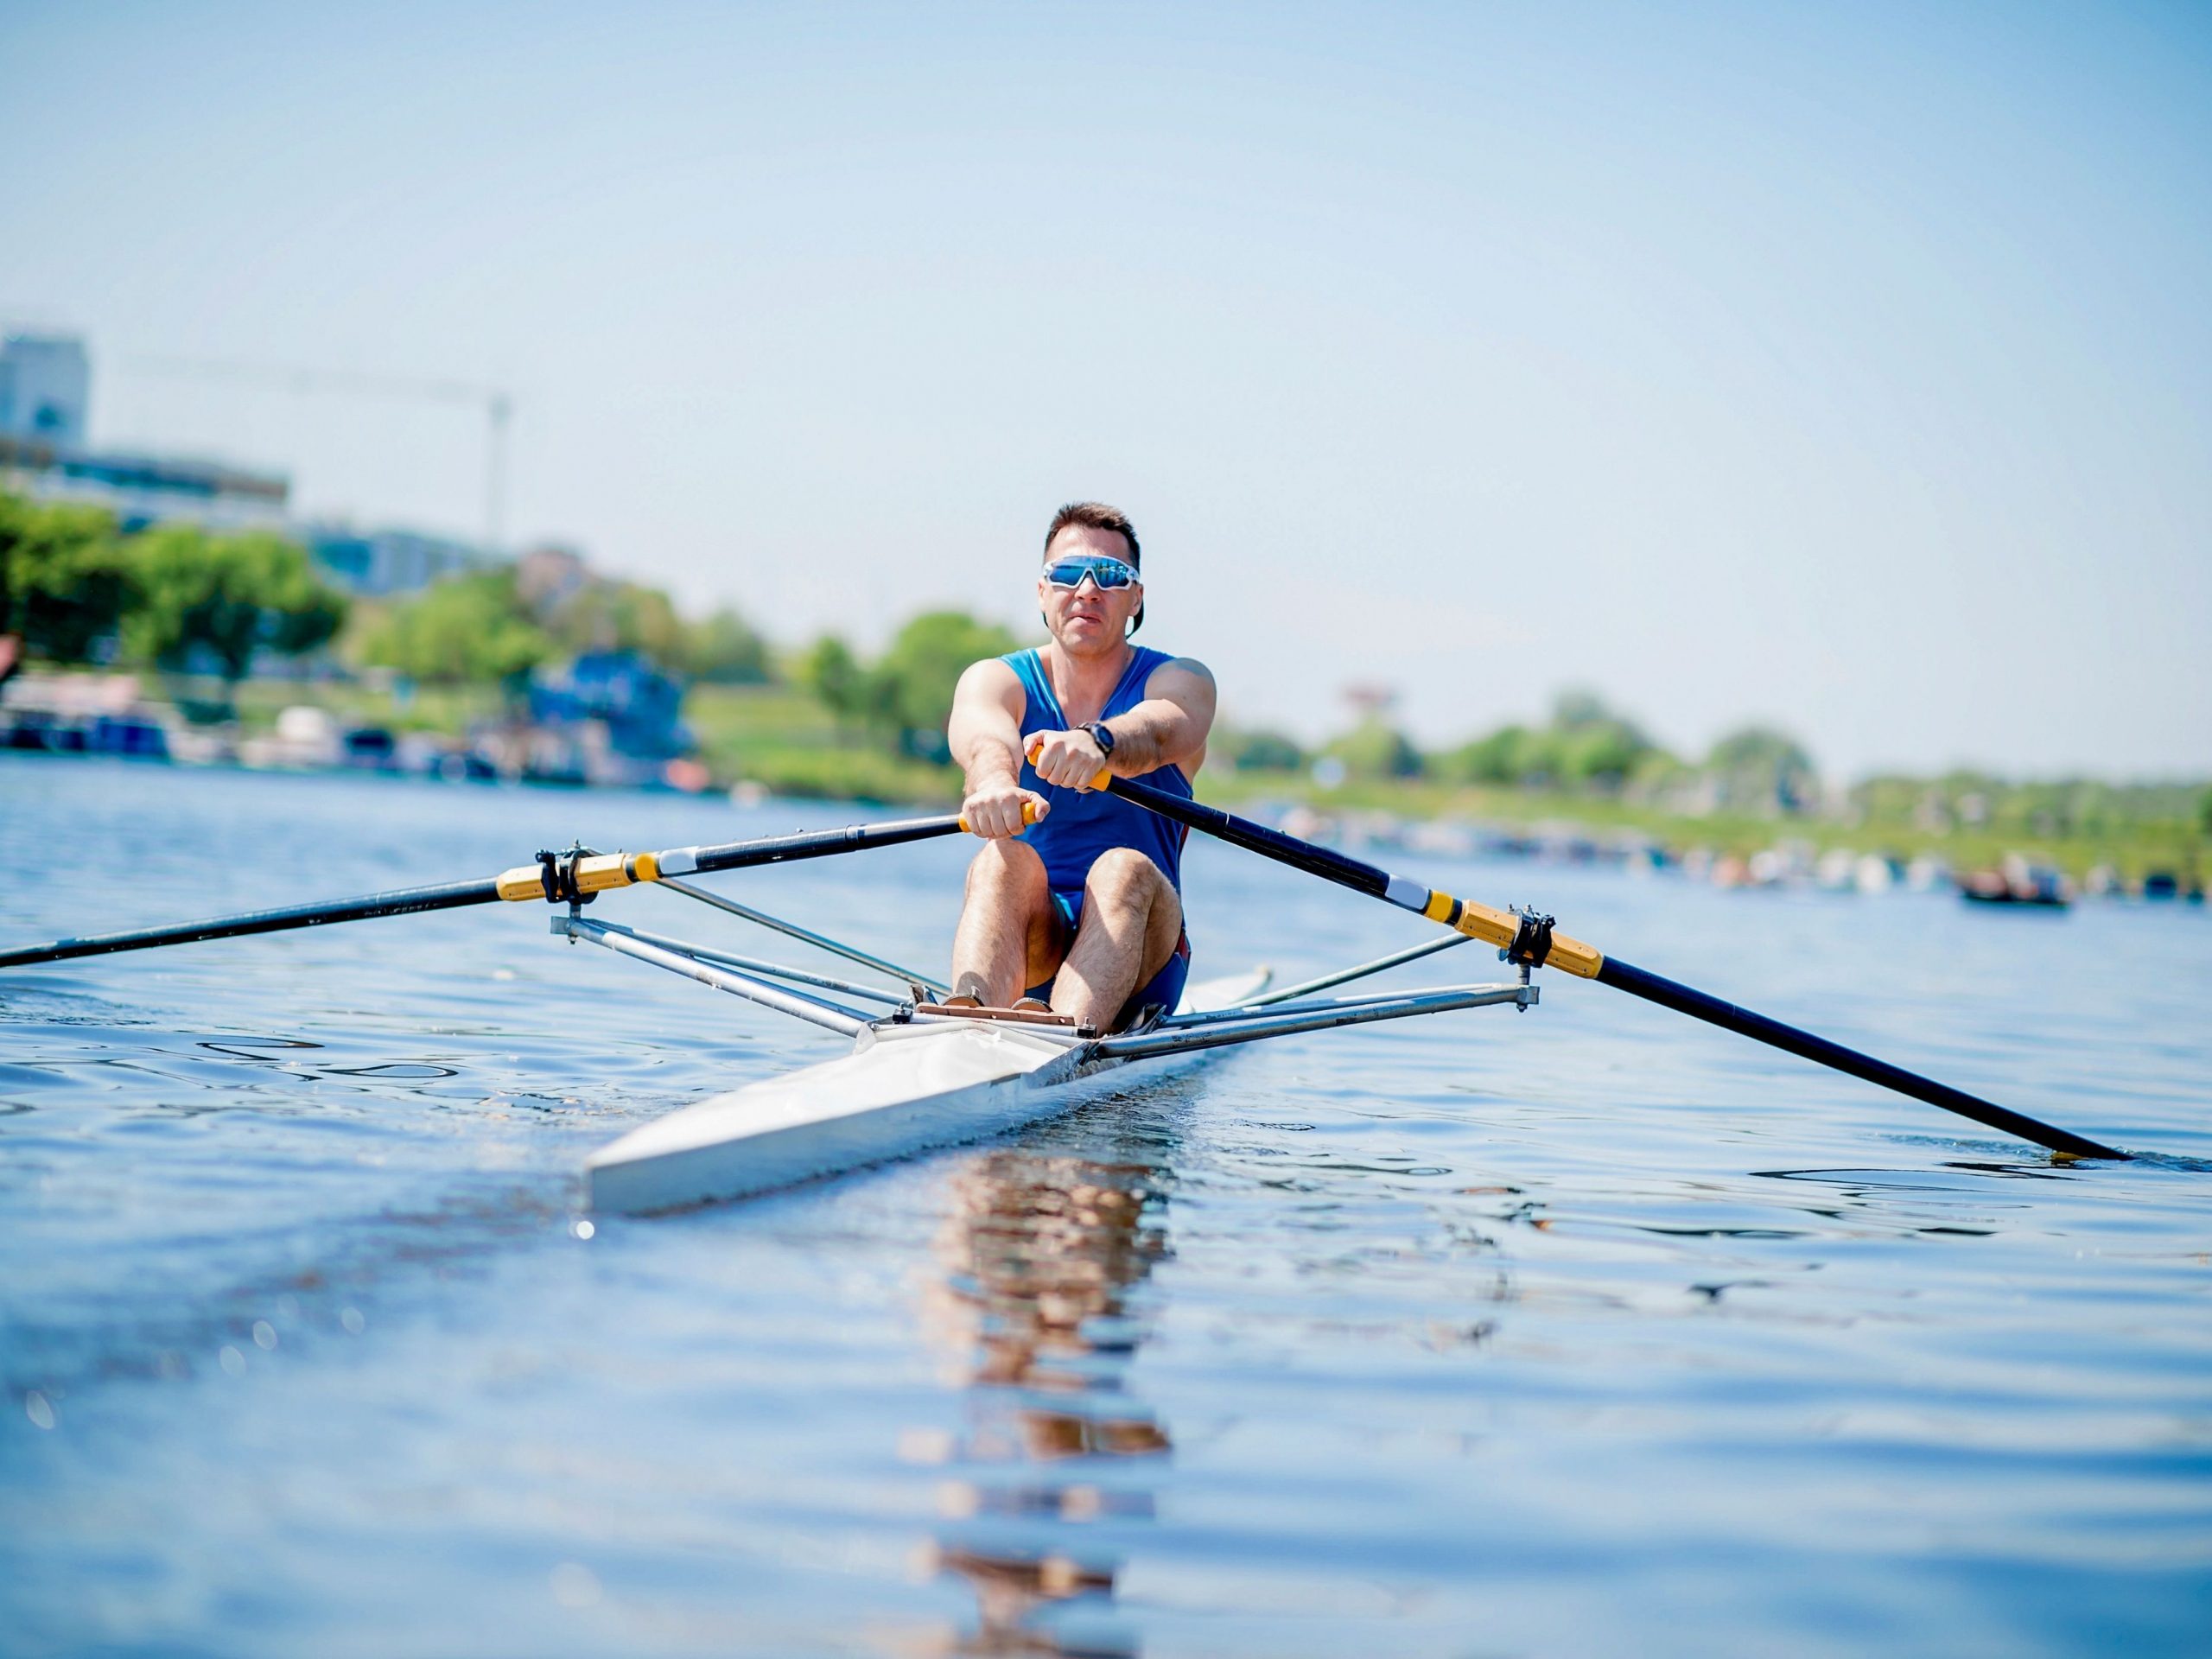 Common Rowing Injuries How To Prevent And Treat Them